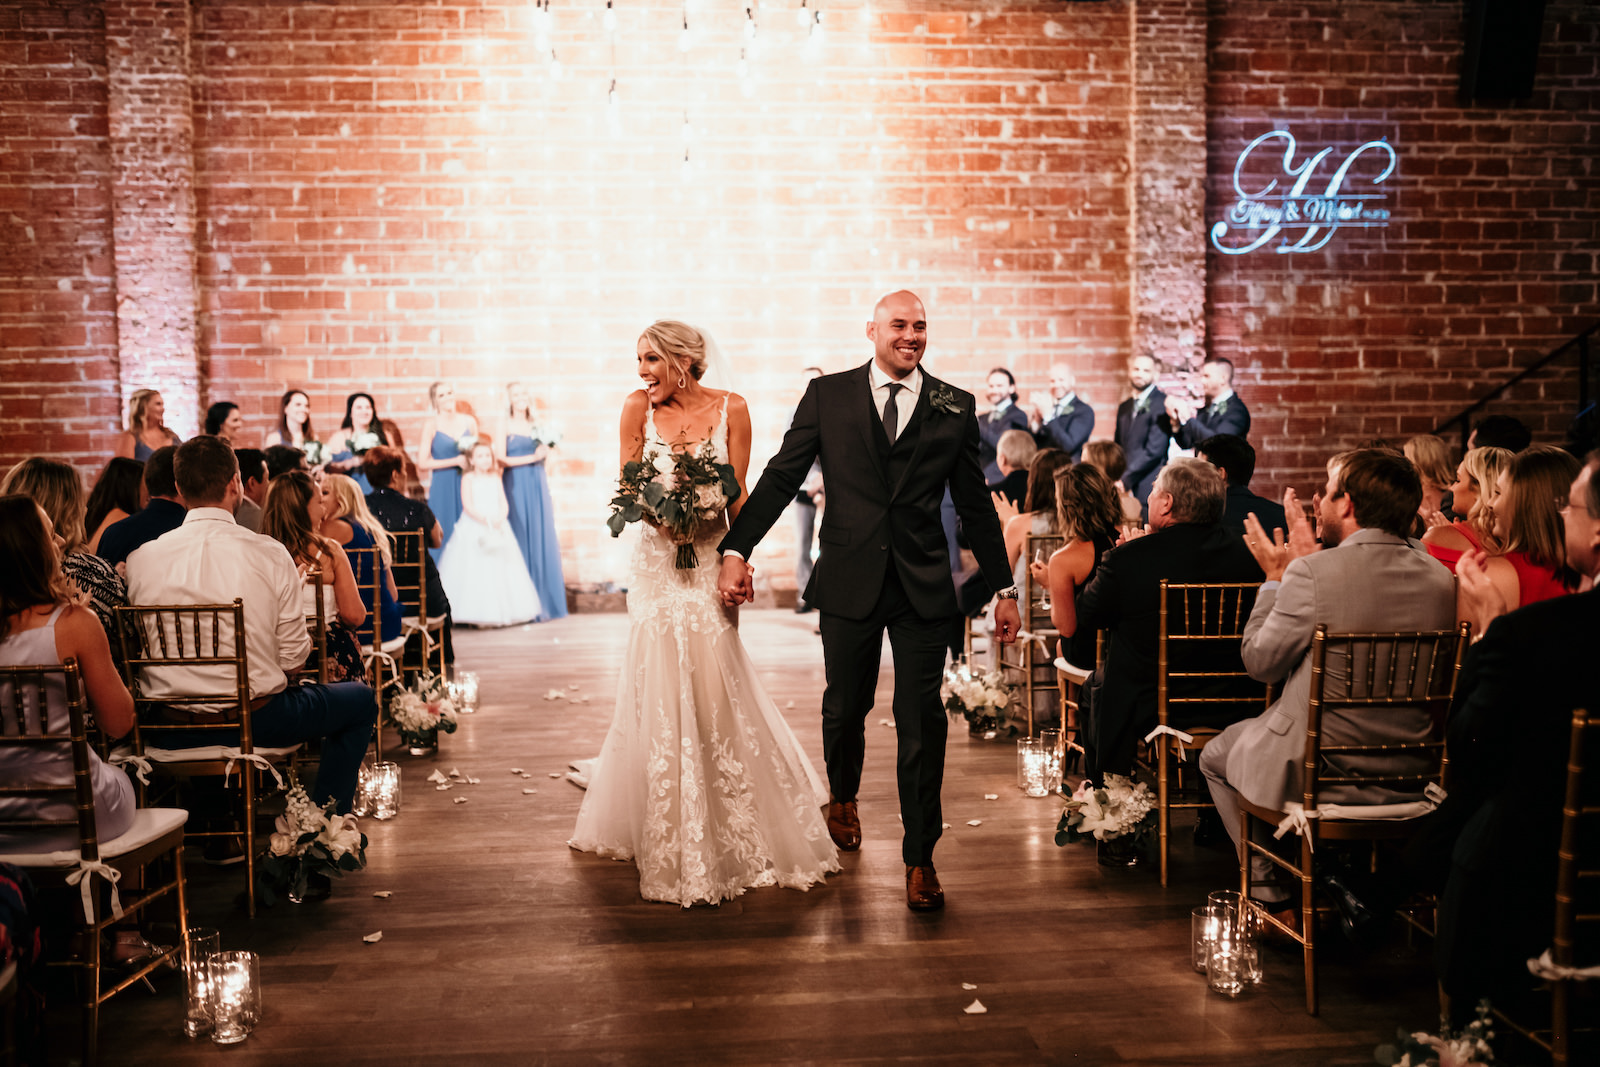 Florida Bride and Groom Just Married During Wedding Ceremony Recessional, Interior Summer Ceremony with Exposed Red Brick Wall and String Lighting | Historic Tampa Bay Wedding Venue NOVA 535 in Downtown St. Petersburg